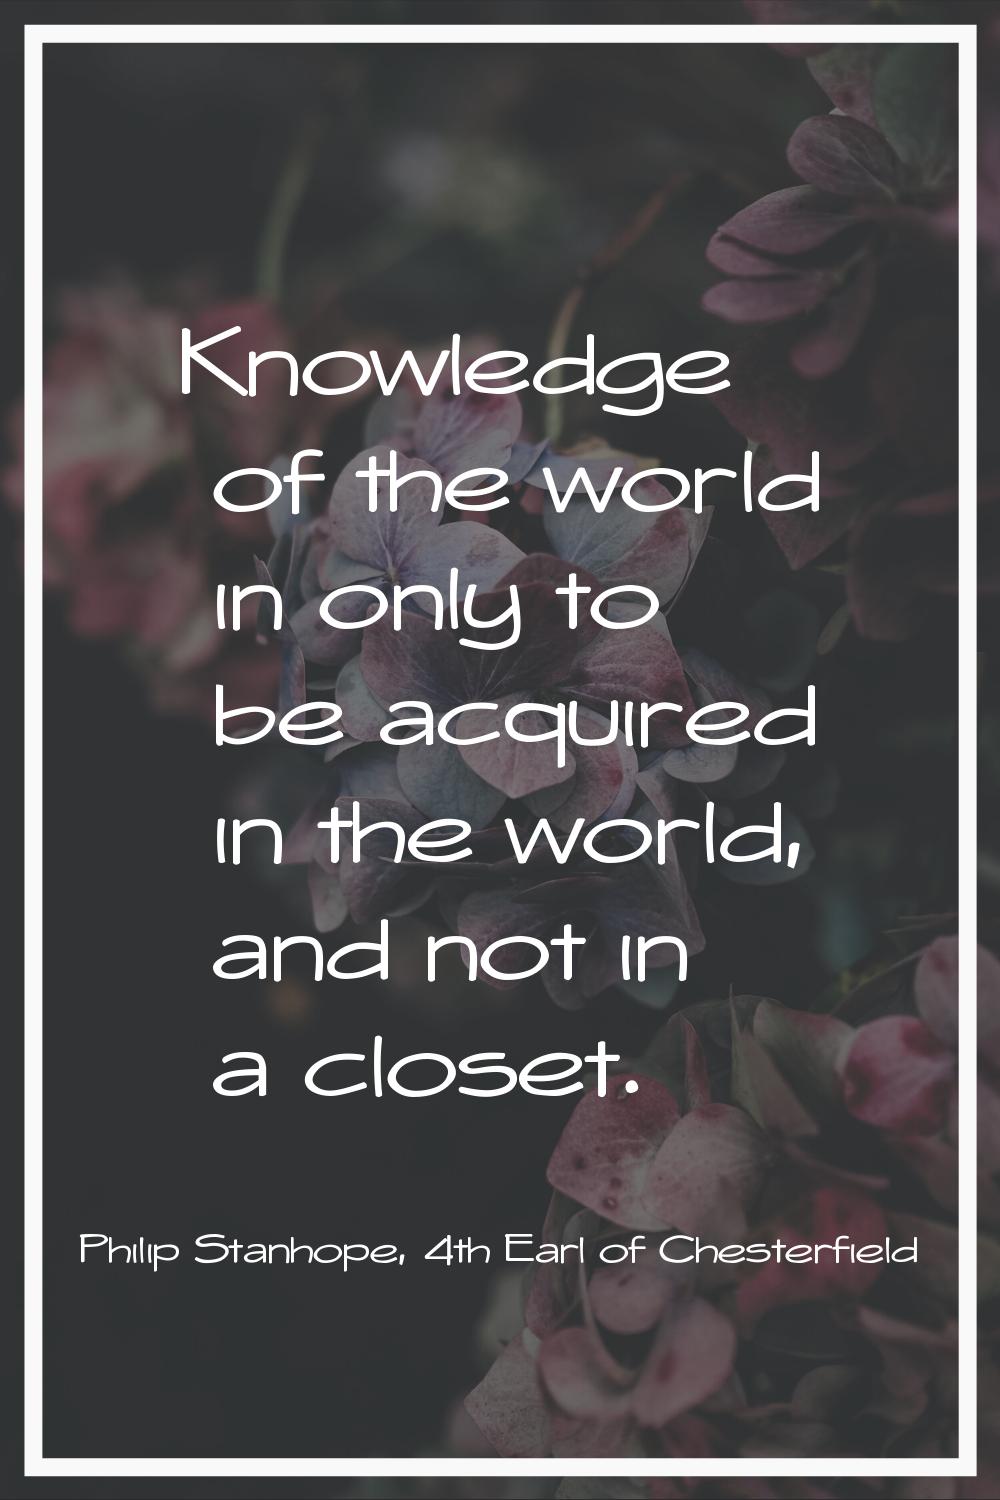 Knowledge of the world in only to be acquired in the world, and not in a closet.